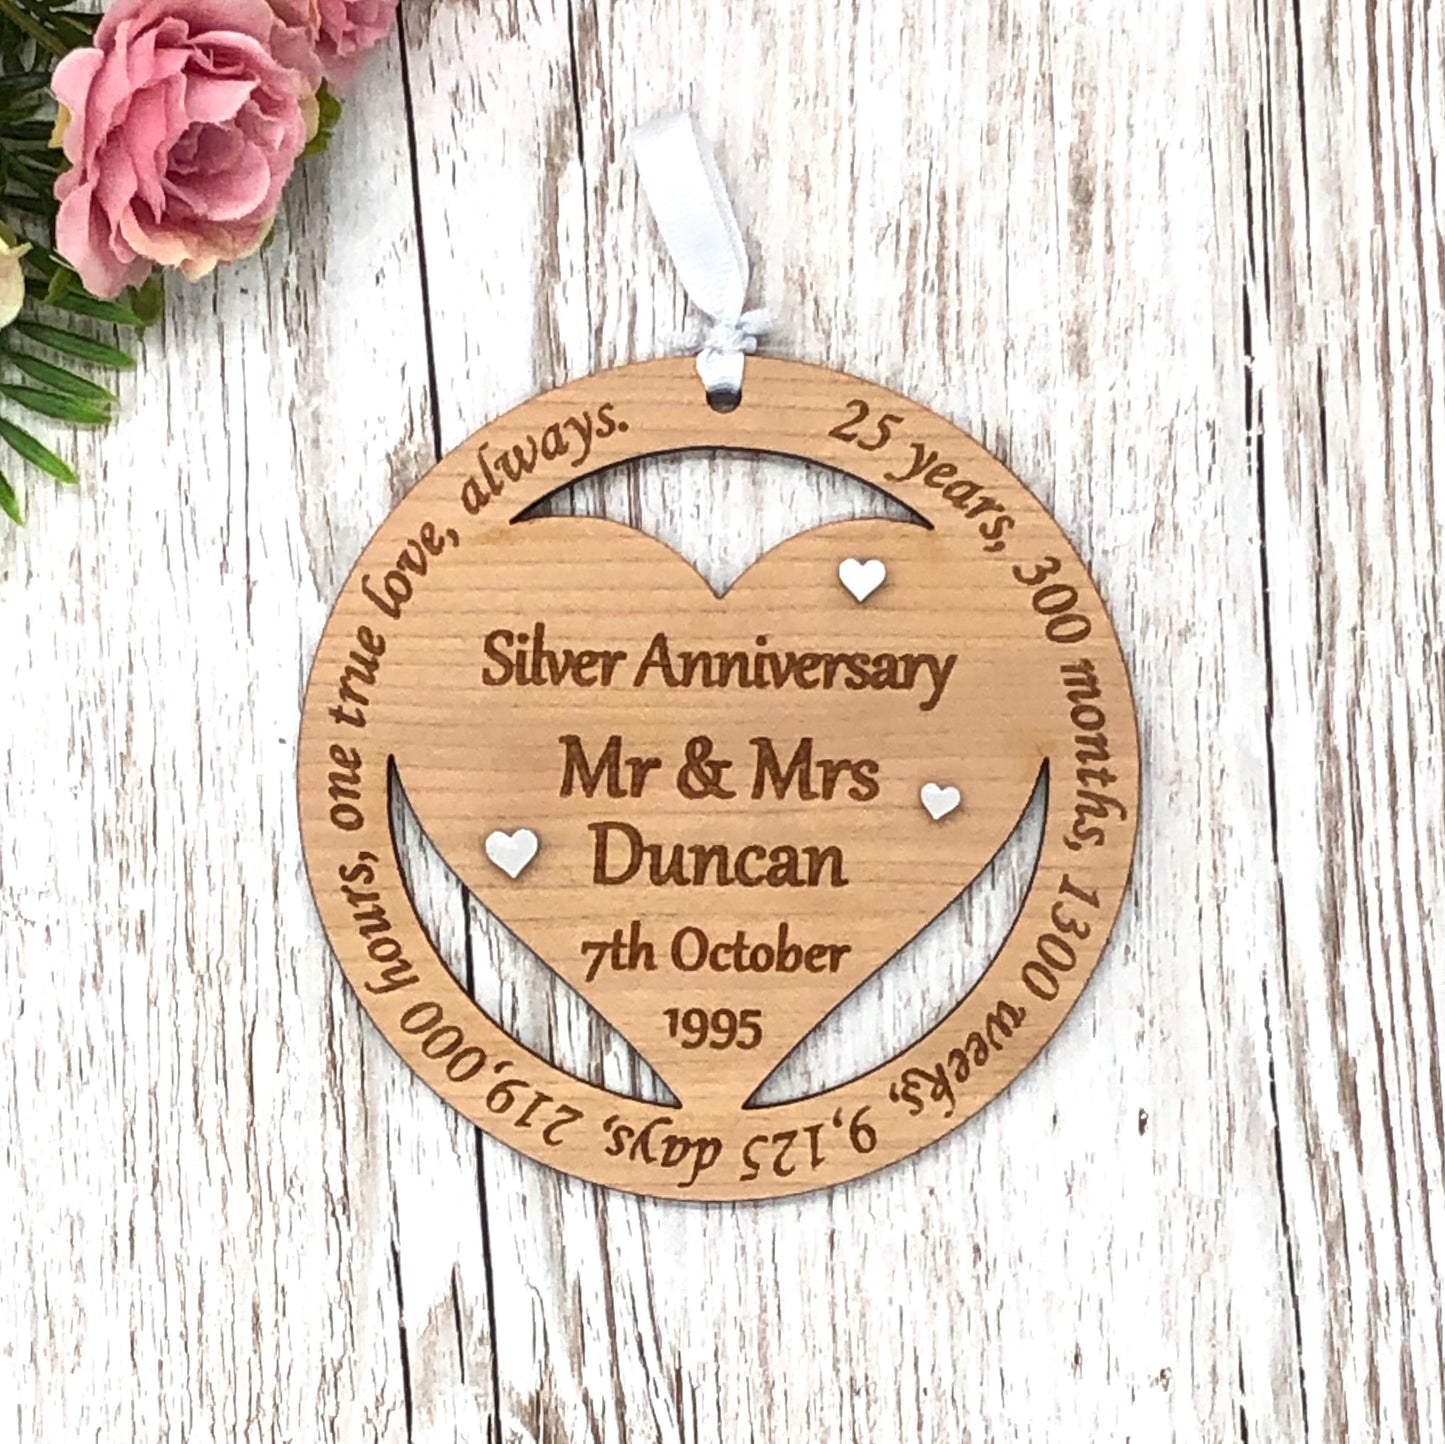 Silver Wedding Anniversary Gift Wooden Hanging Plaque 25th Anniversary